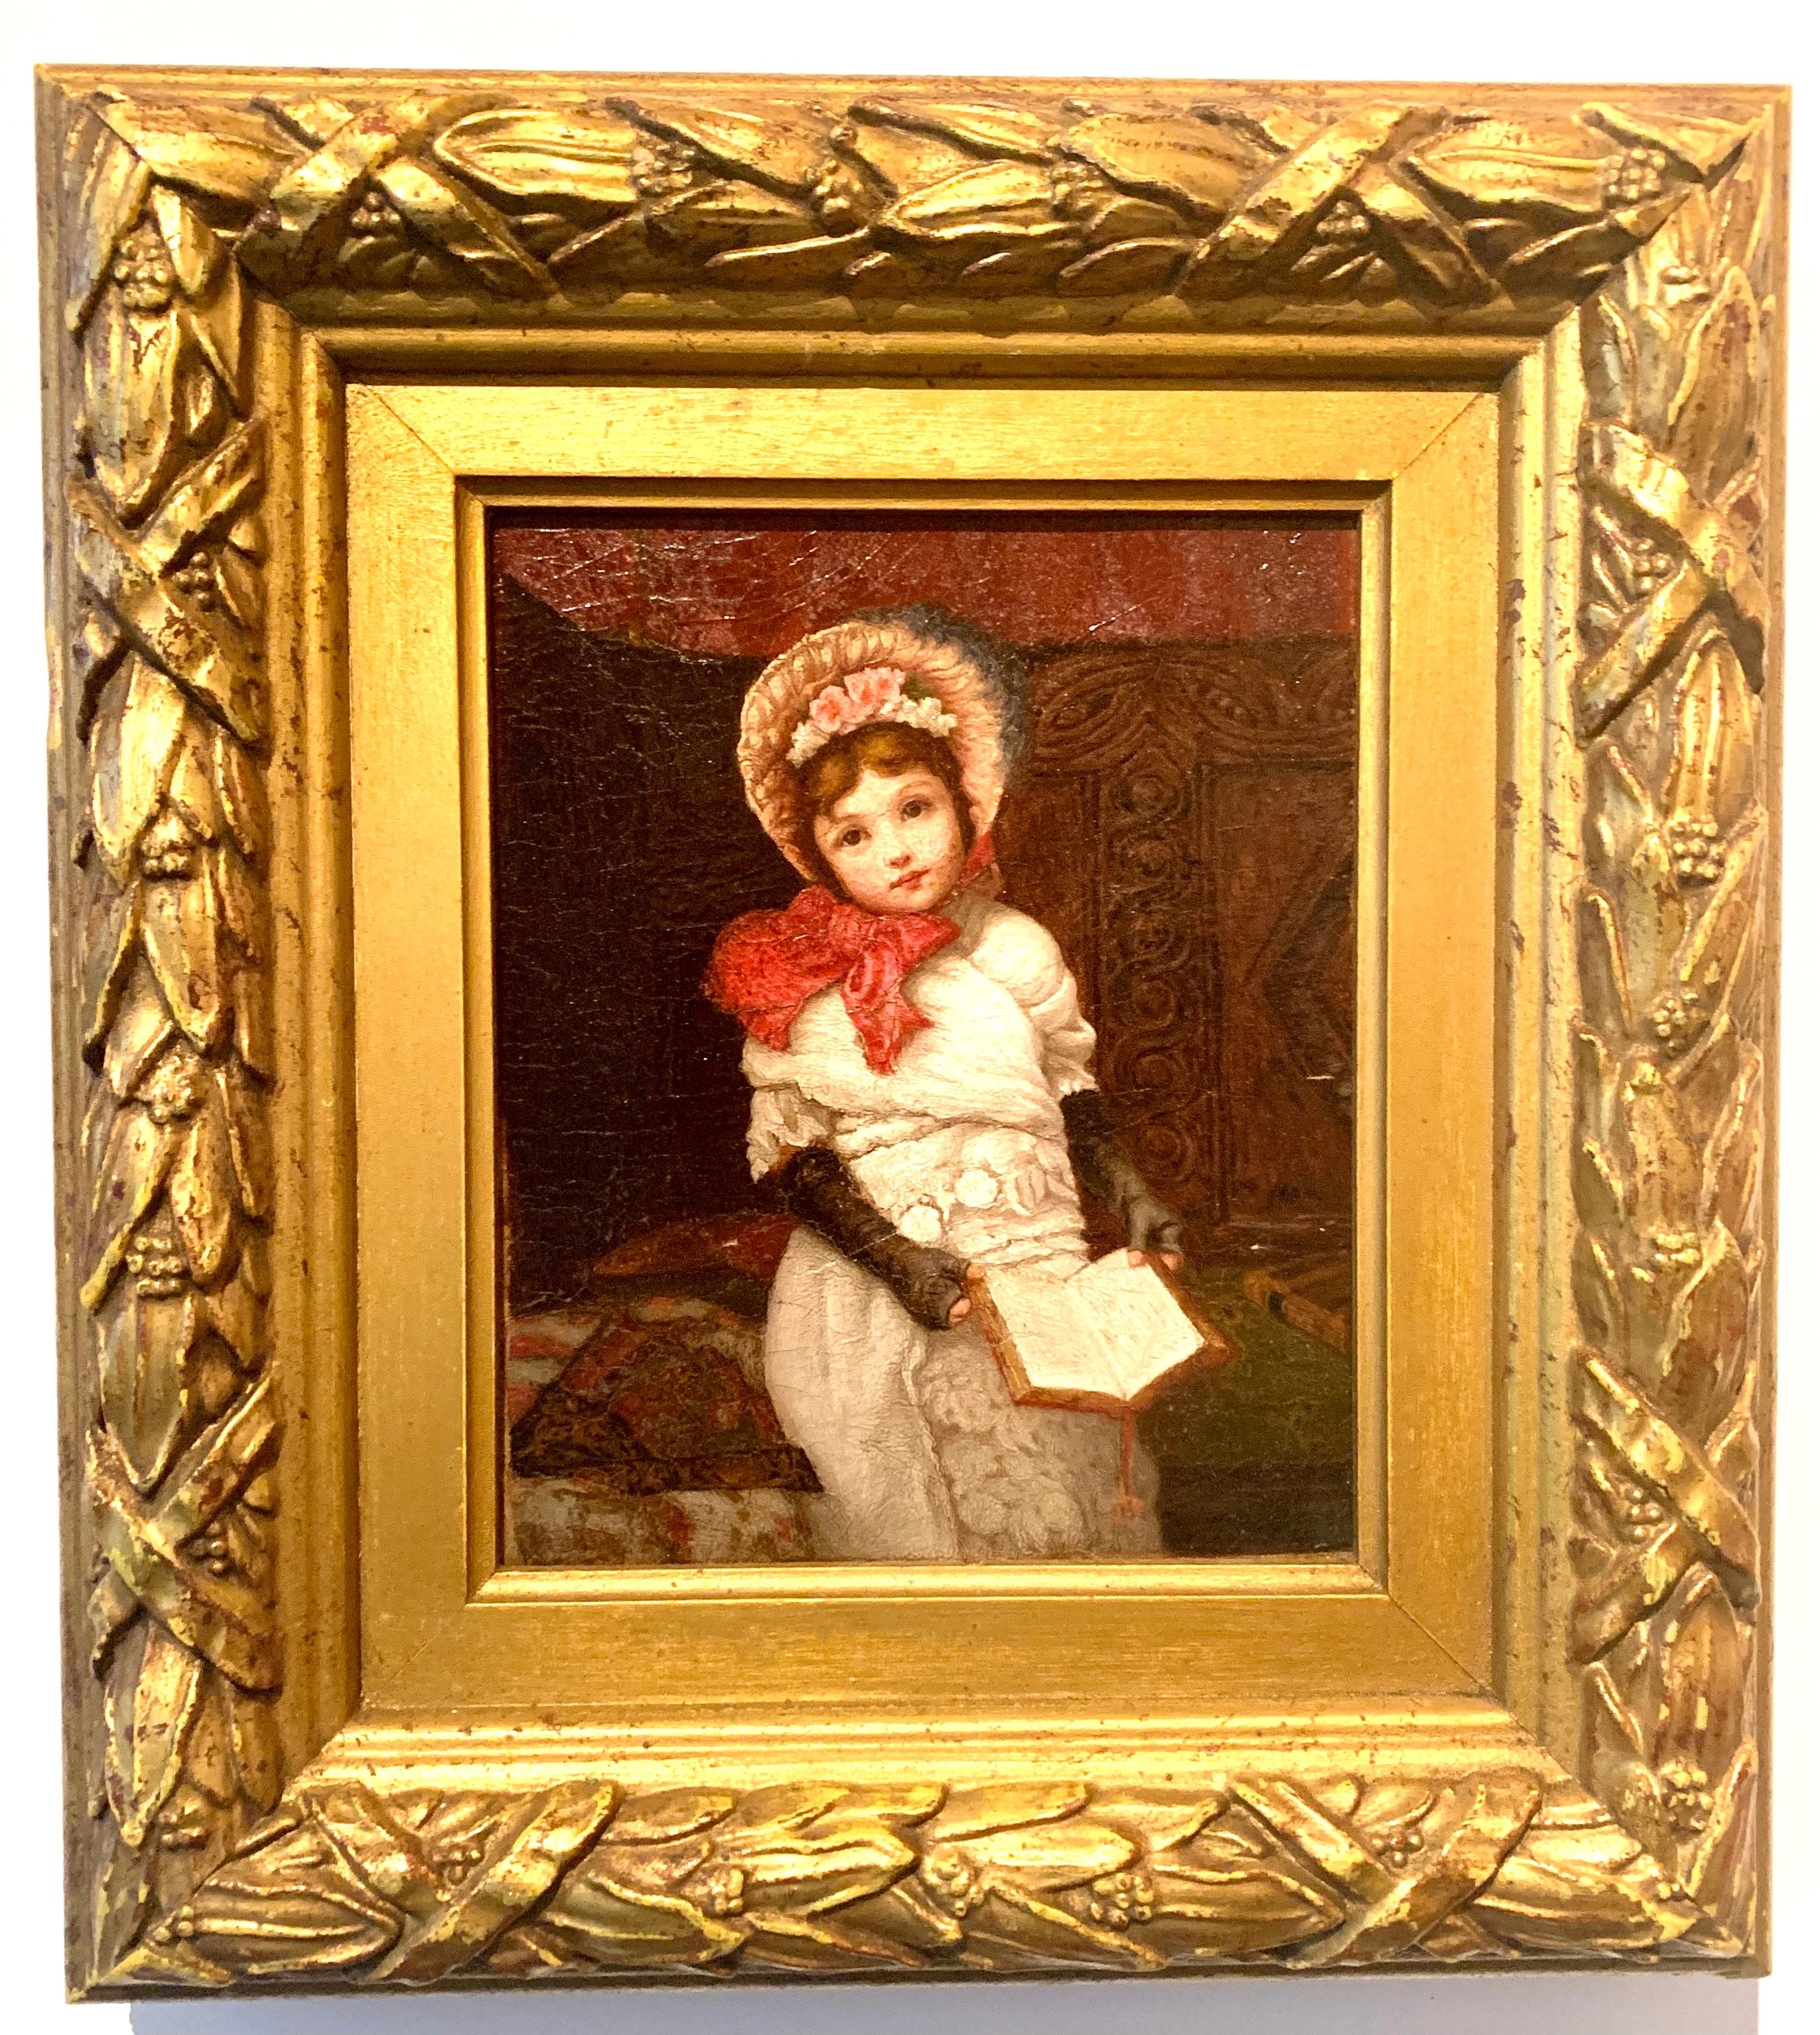 Unknown Figurative Painting - Victorian English portrait of a seated little girl with a red bow reading a book